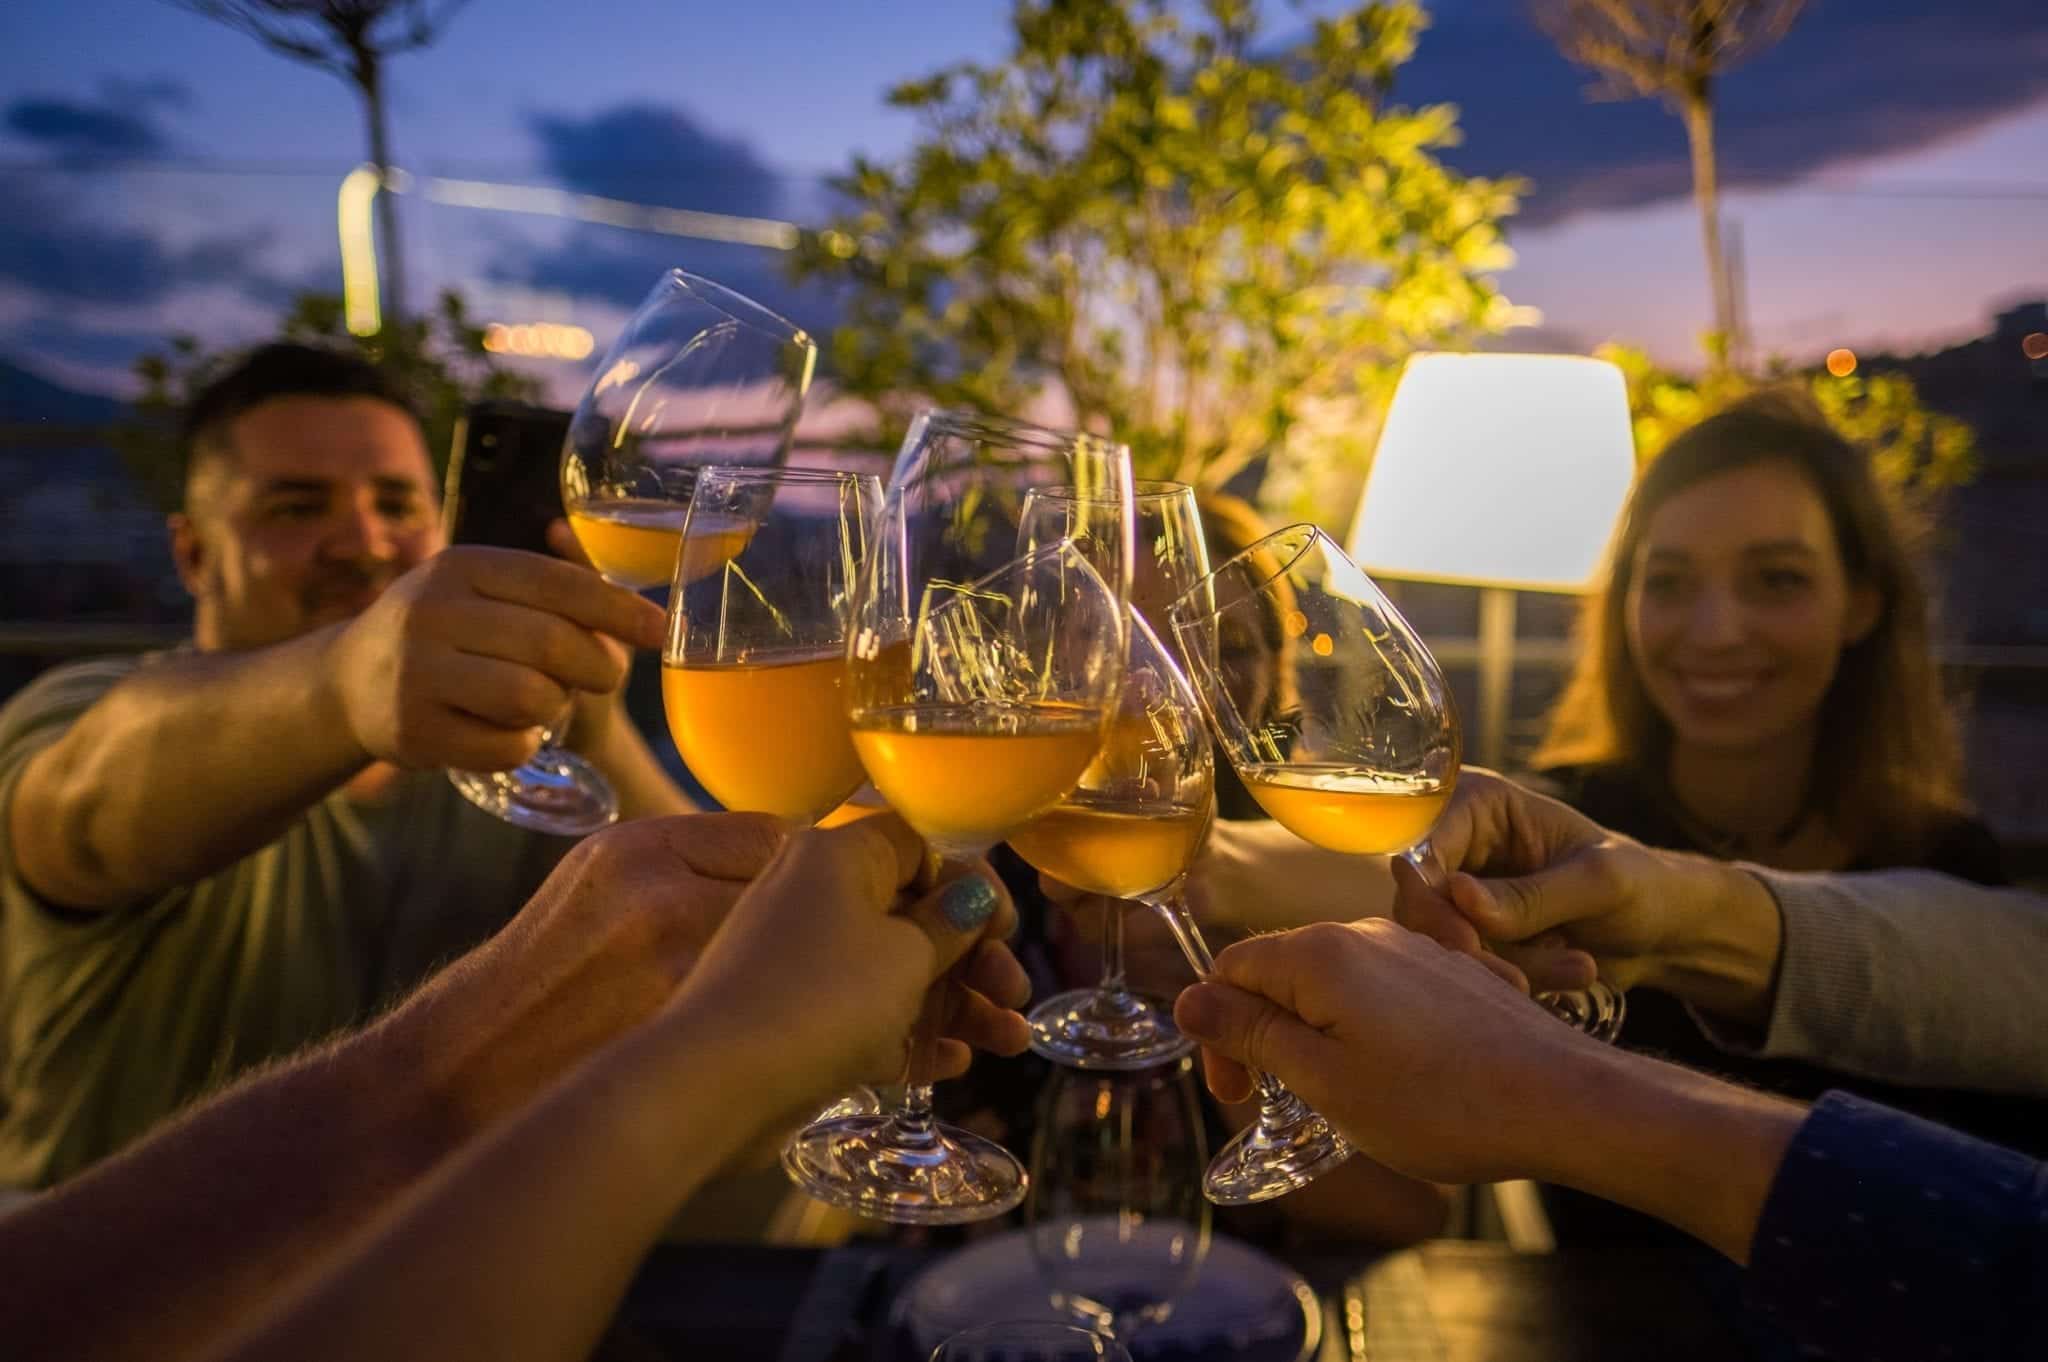 Several hands toasting glasses of orange wine in front of a blue and purple sunset sky.